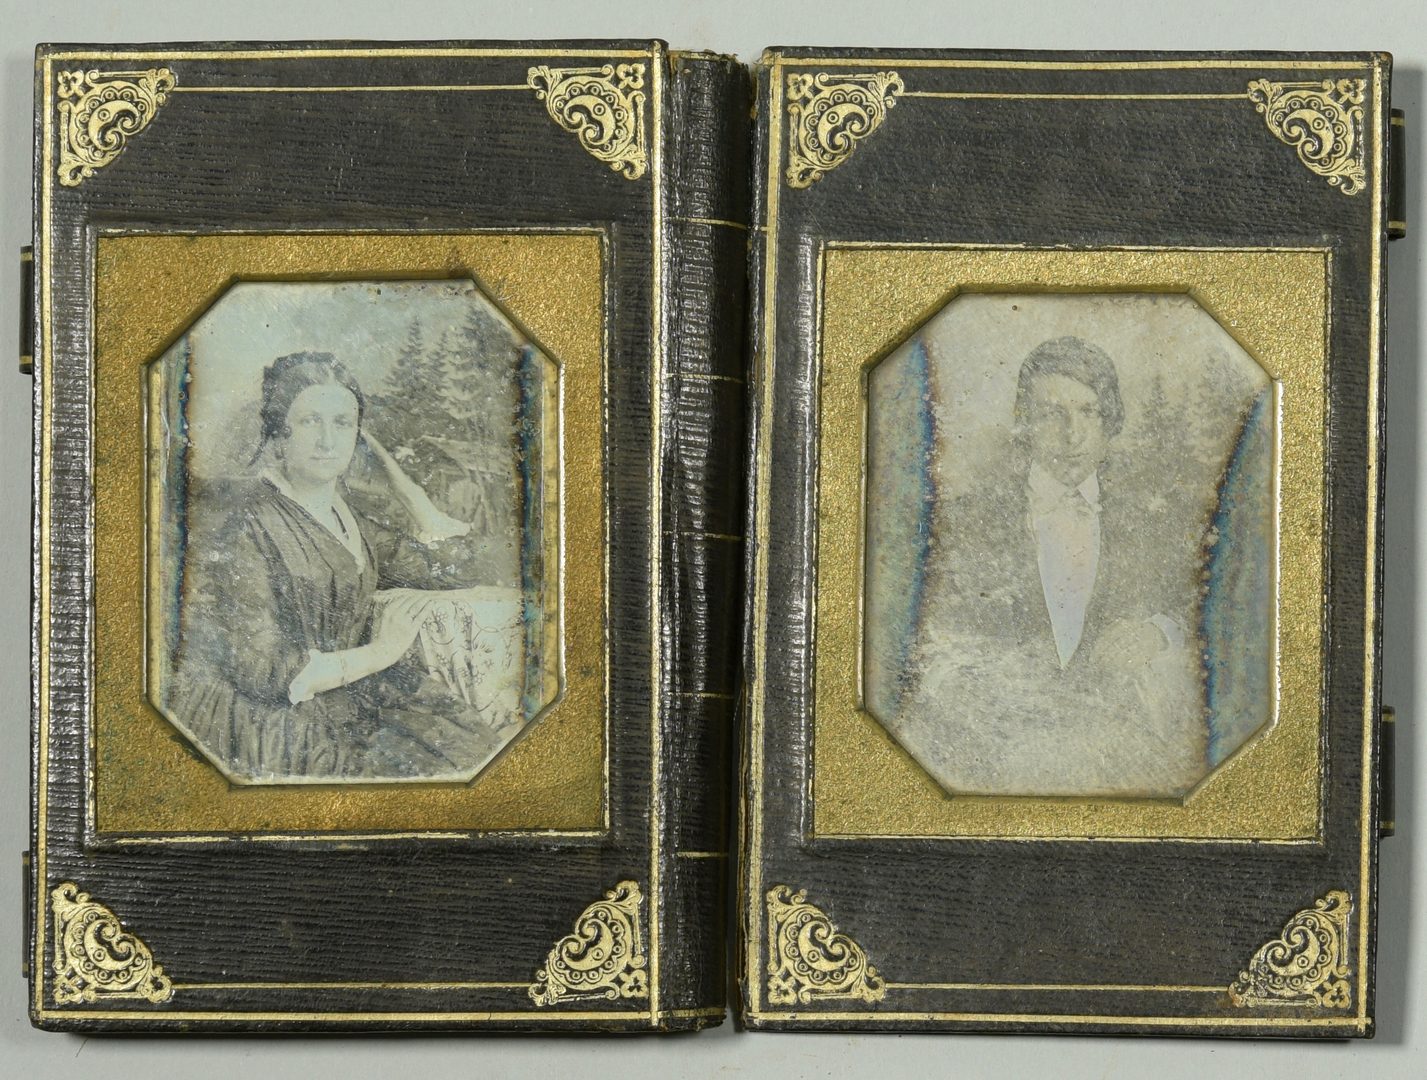 Lot 757: Archive of ambrotypes, tintypes, dags, silhouettes and miniature portraits